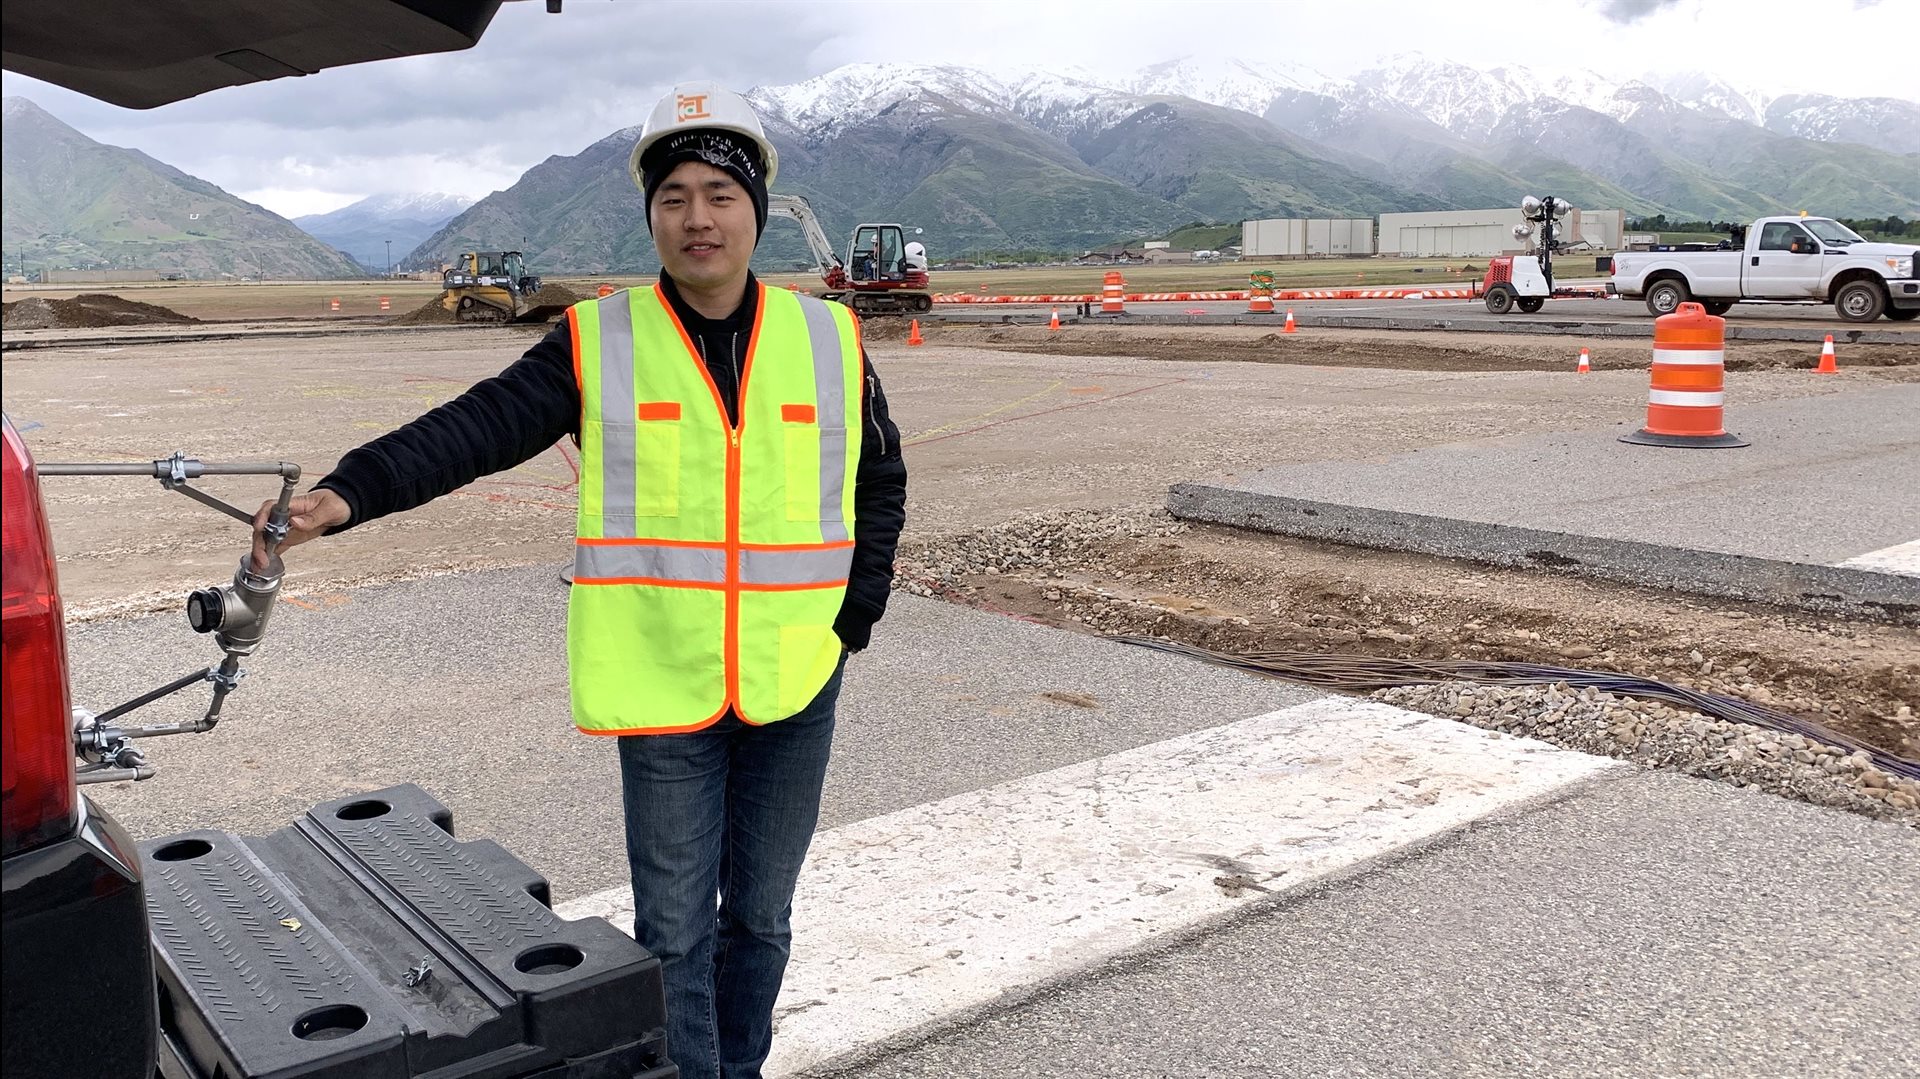 &amp;amp;lt;span style=&amp;amp;quot;background-color: var(--engr-white);&amp;amp;quot;&amp;amp;gt;Kang while on a field trip to Utah for a research project in 2019&amp;amp;lt;/span&amp;amp;gt;&amp;amp;lt;span style=&amp;amp;quot;background-color: var(--engr-white);&amp;amp;quot;&amp;amp;gt;.&amp;amp;lt;/span&amp;amp;gt;